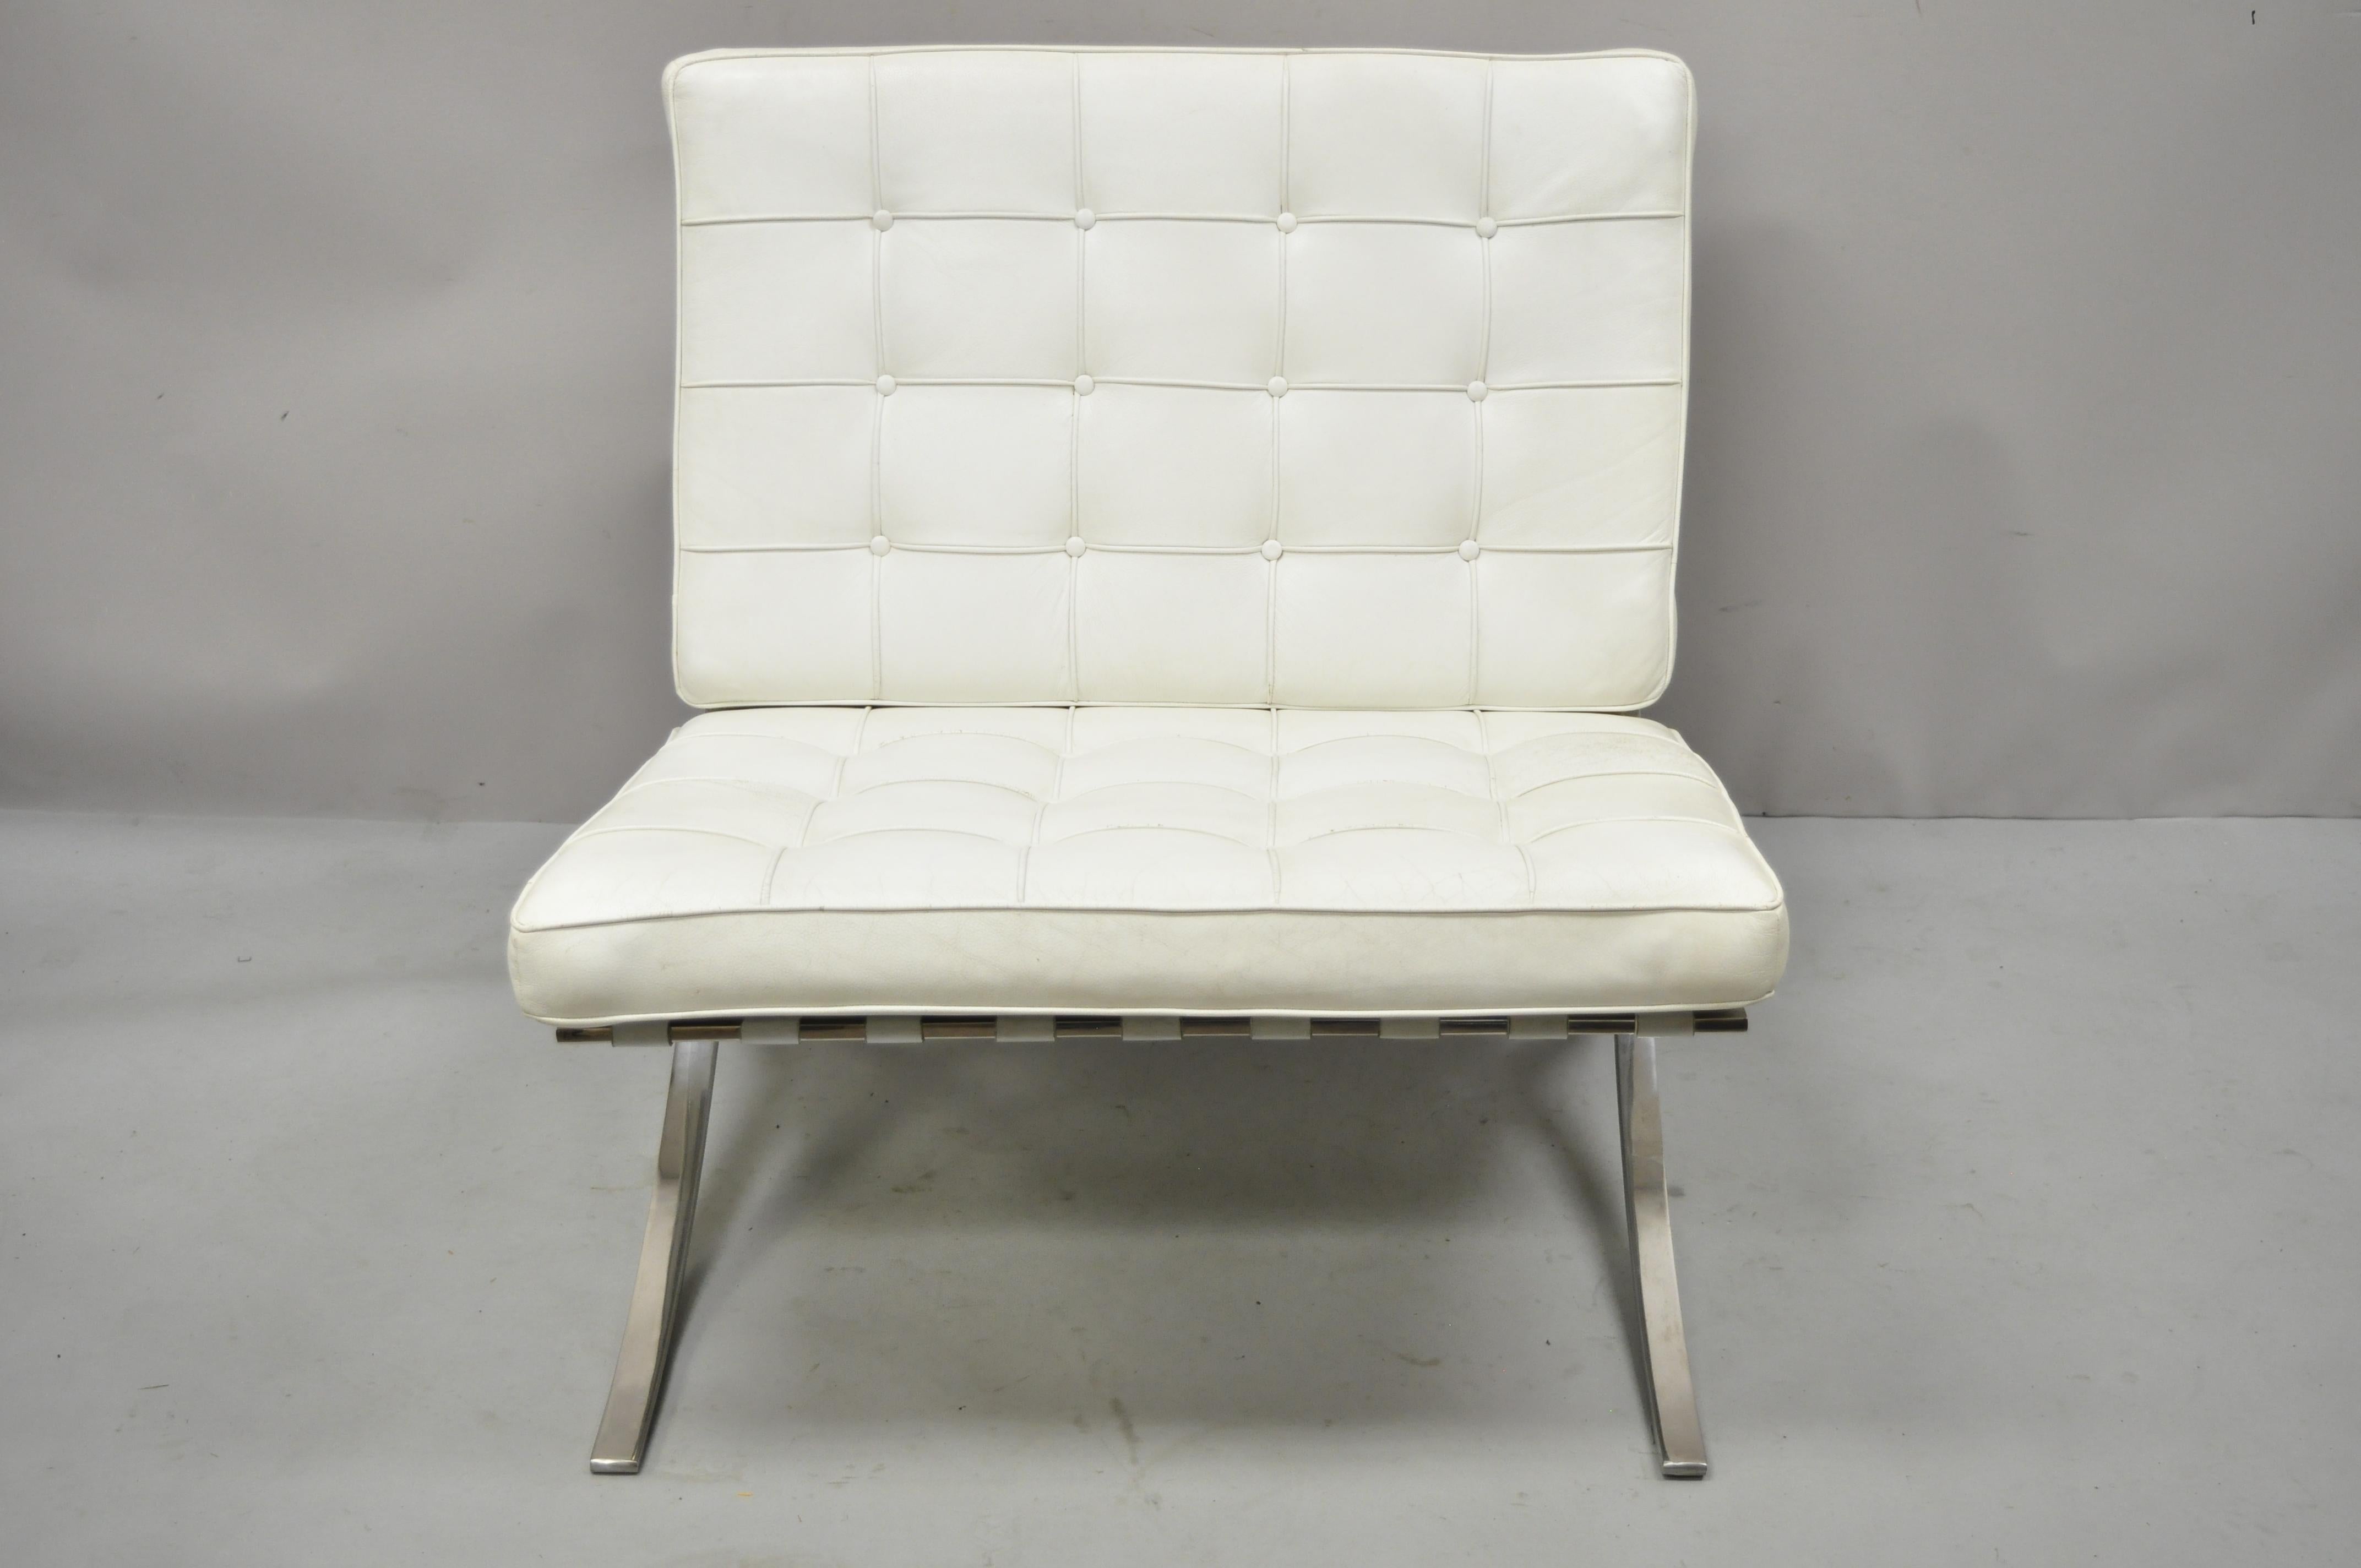 White leather Ludwig Mies van der Rohe Barcelona style chrome steel lounge chair, vintage reproduction. Item features white leather button tufted cushions white leather straps, heavy polished steel frame, great style and form. Late 20th century,